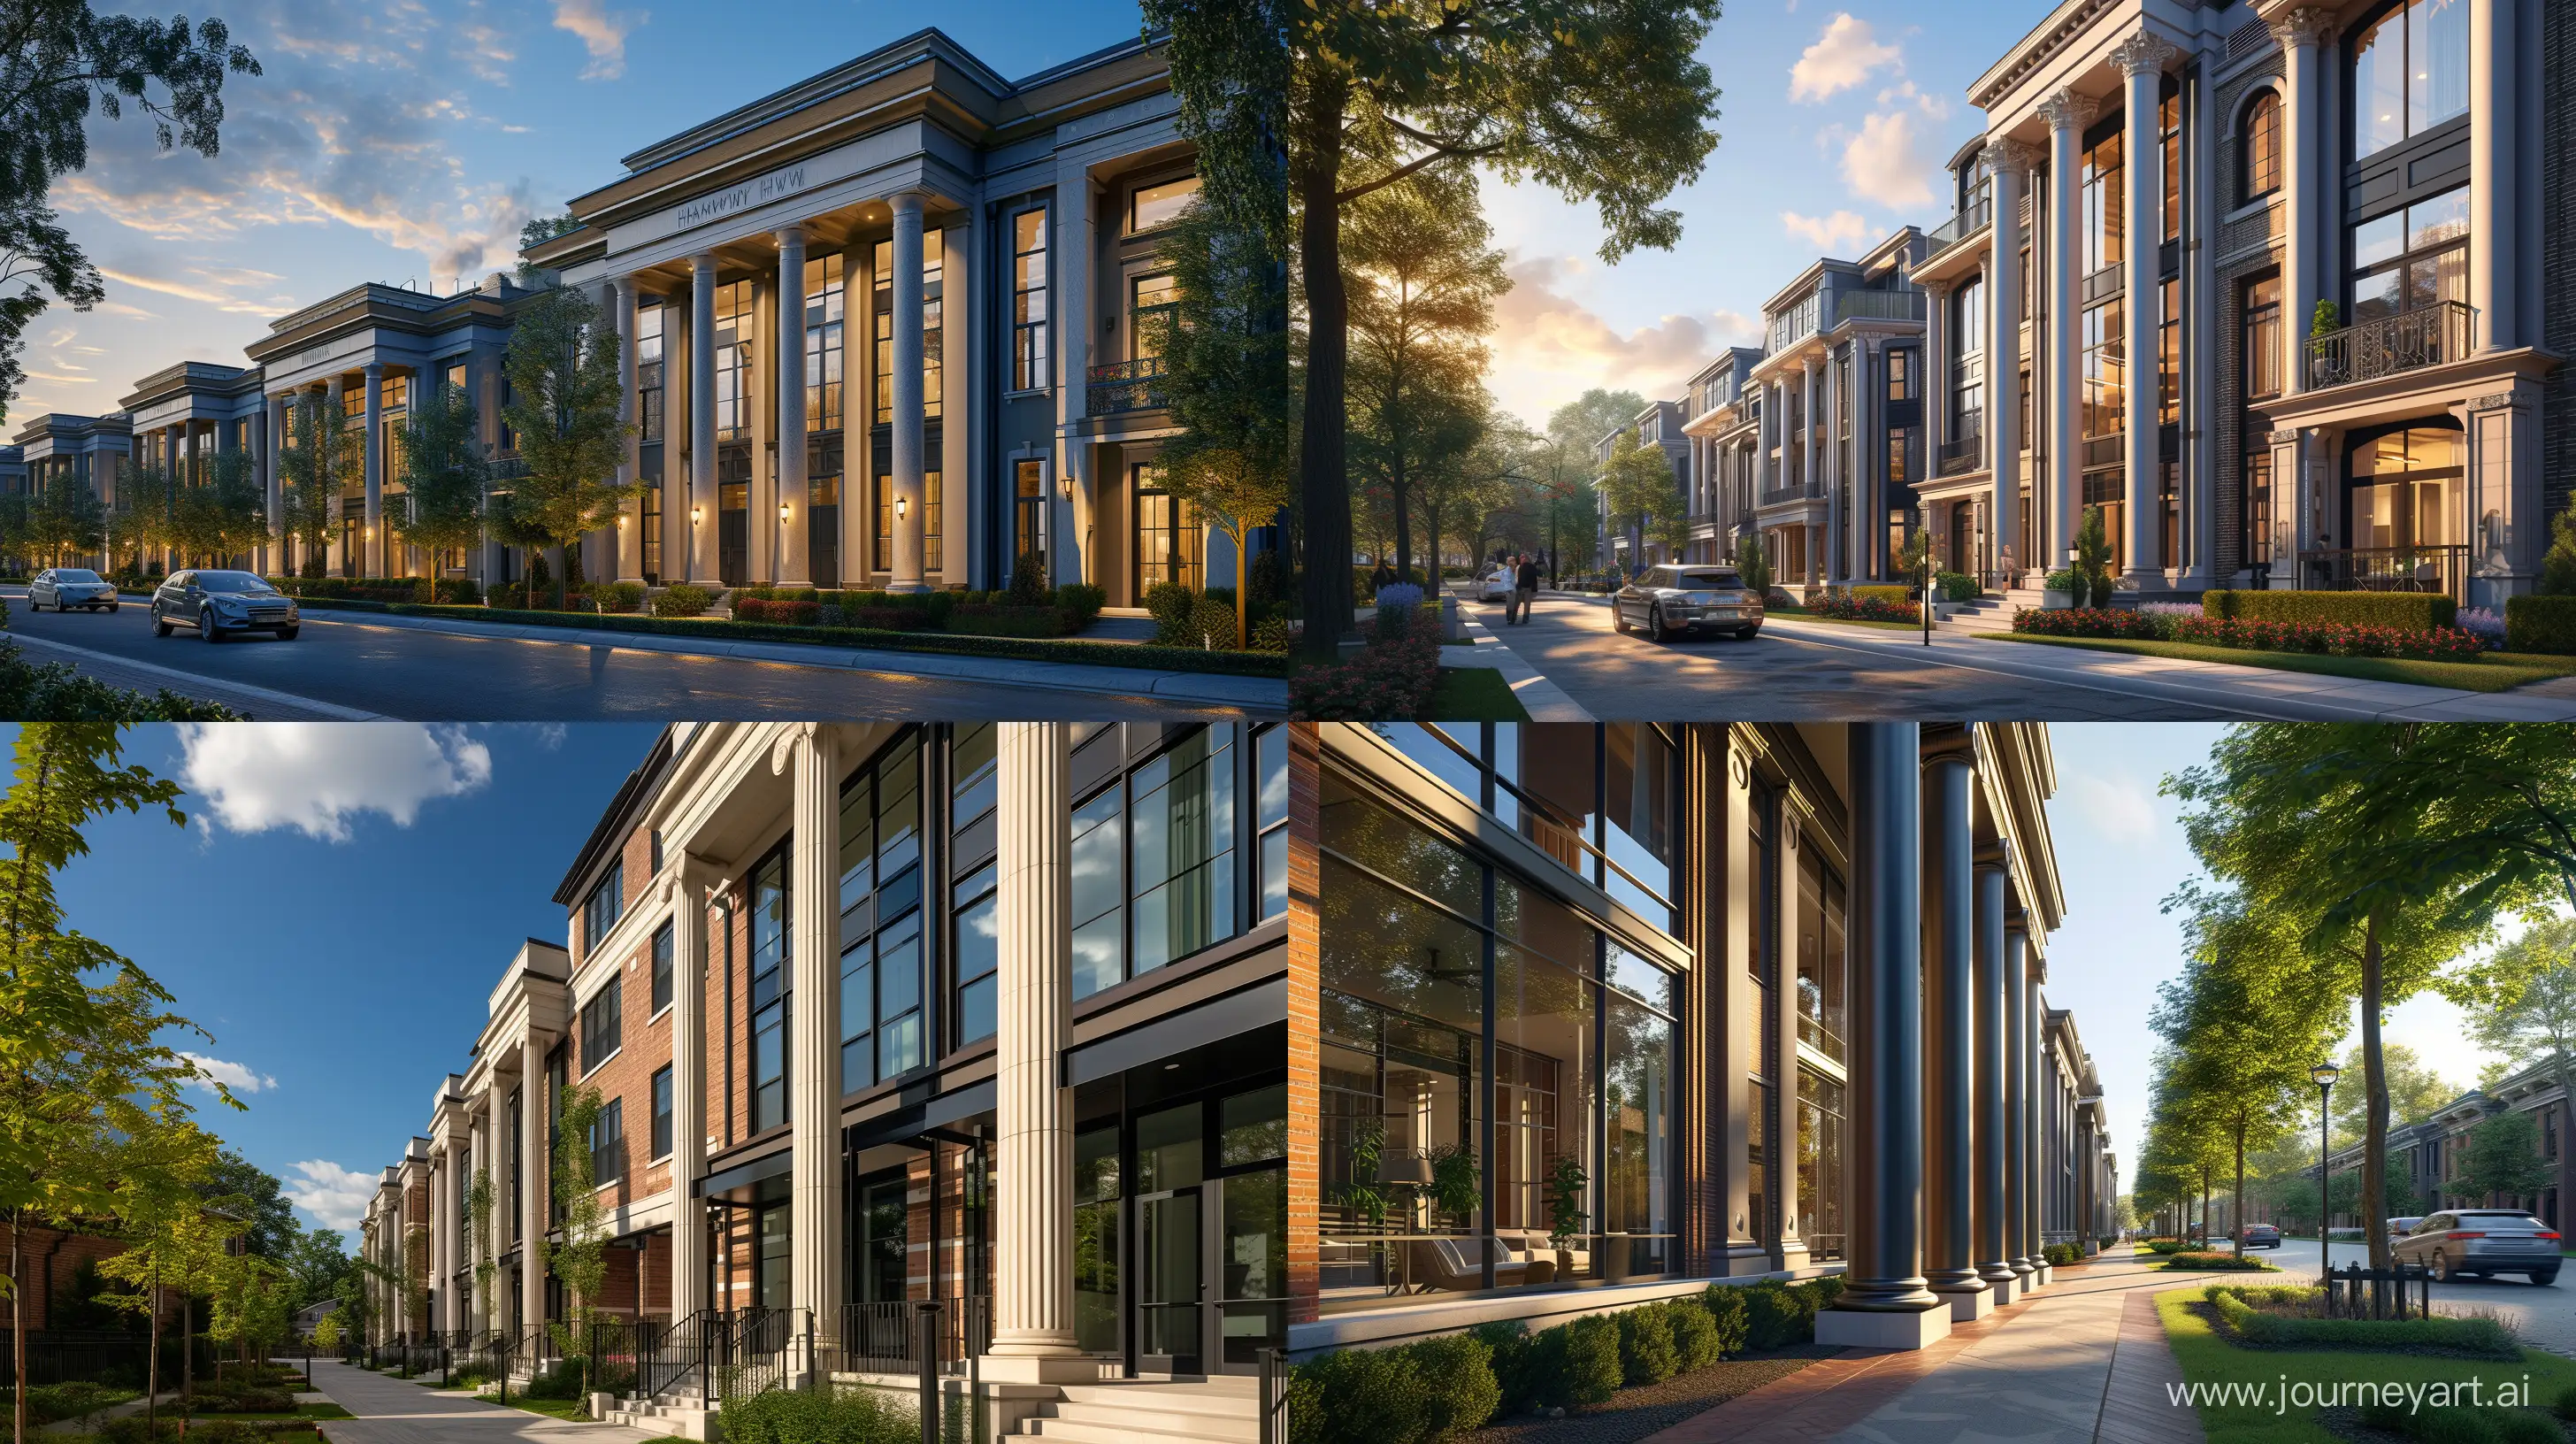 Elegant-Harmony-Haven-Townhouses-Rootwise-Architects-Fusion-of-Classical-and-Modern-Design-Captured-in-Stunning-Photography